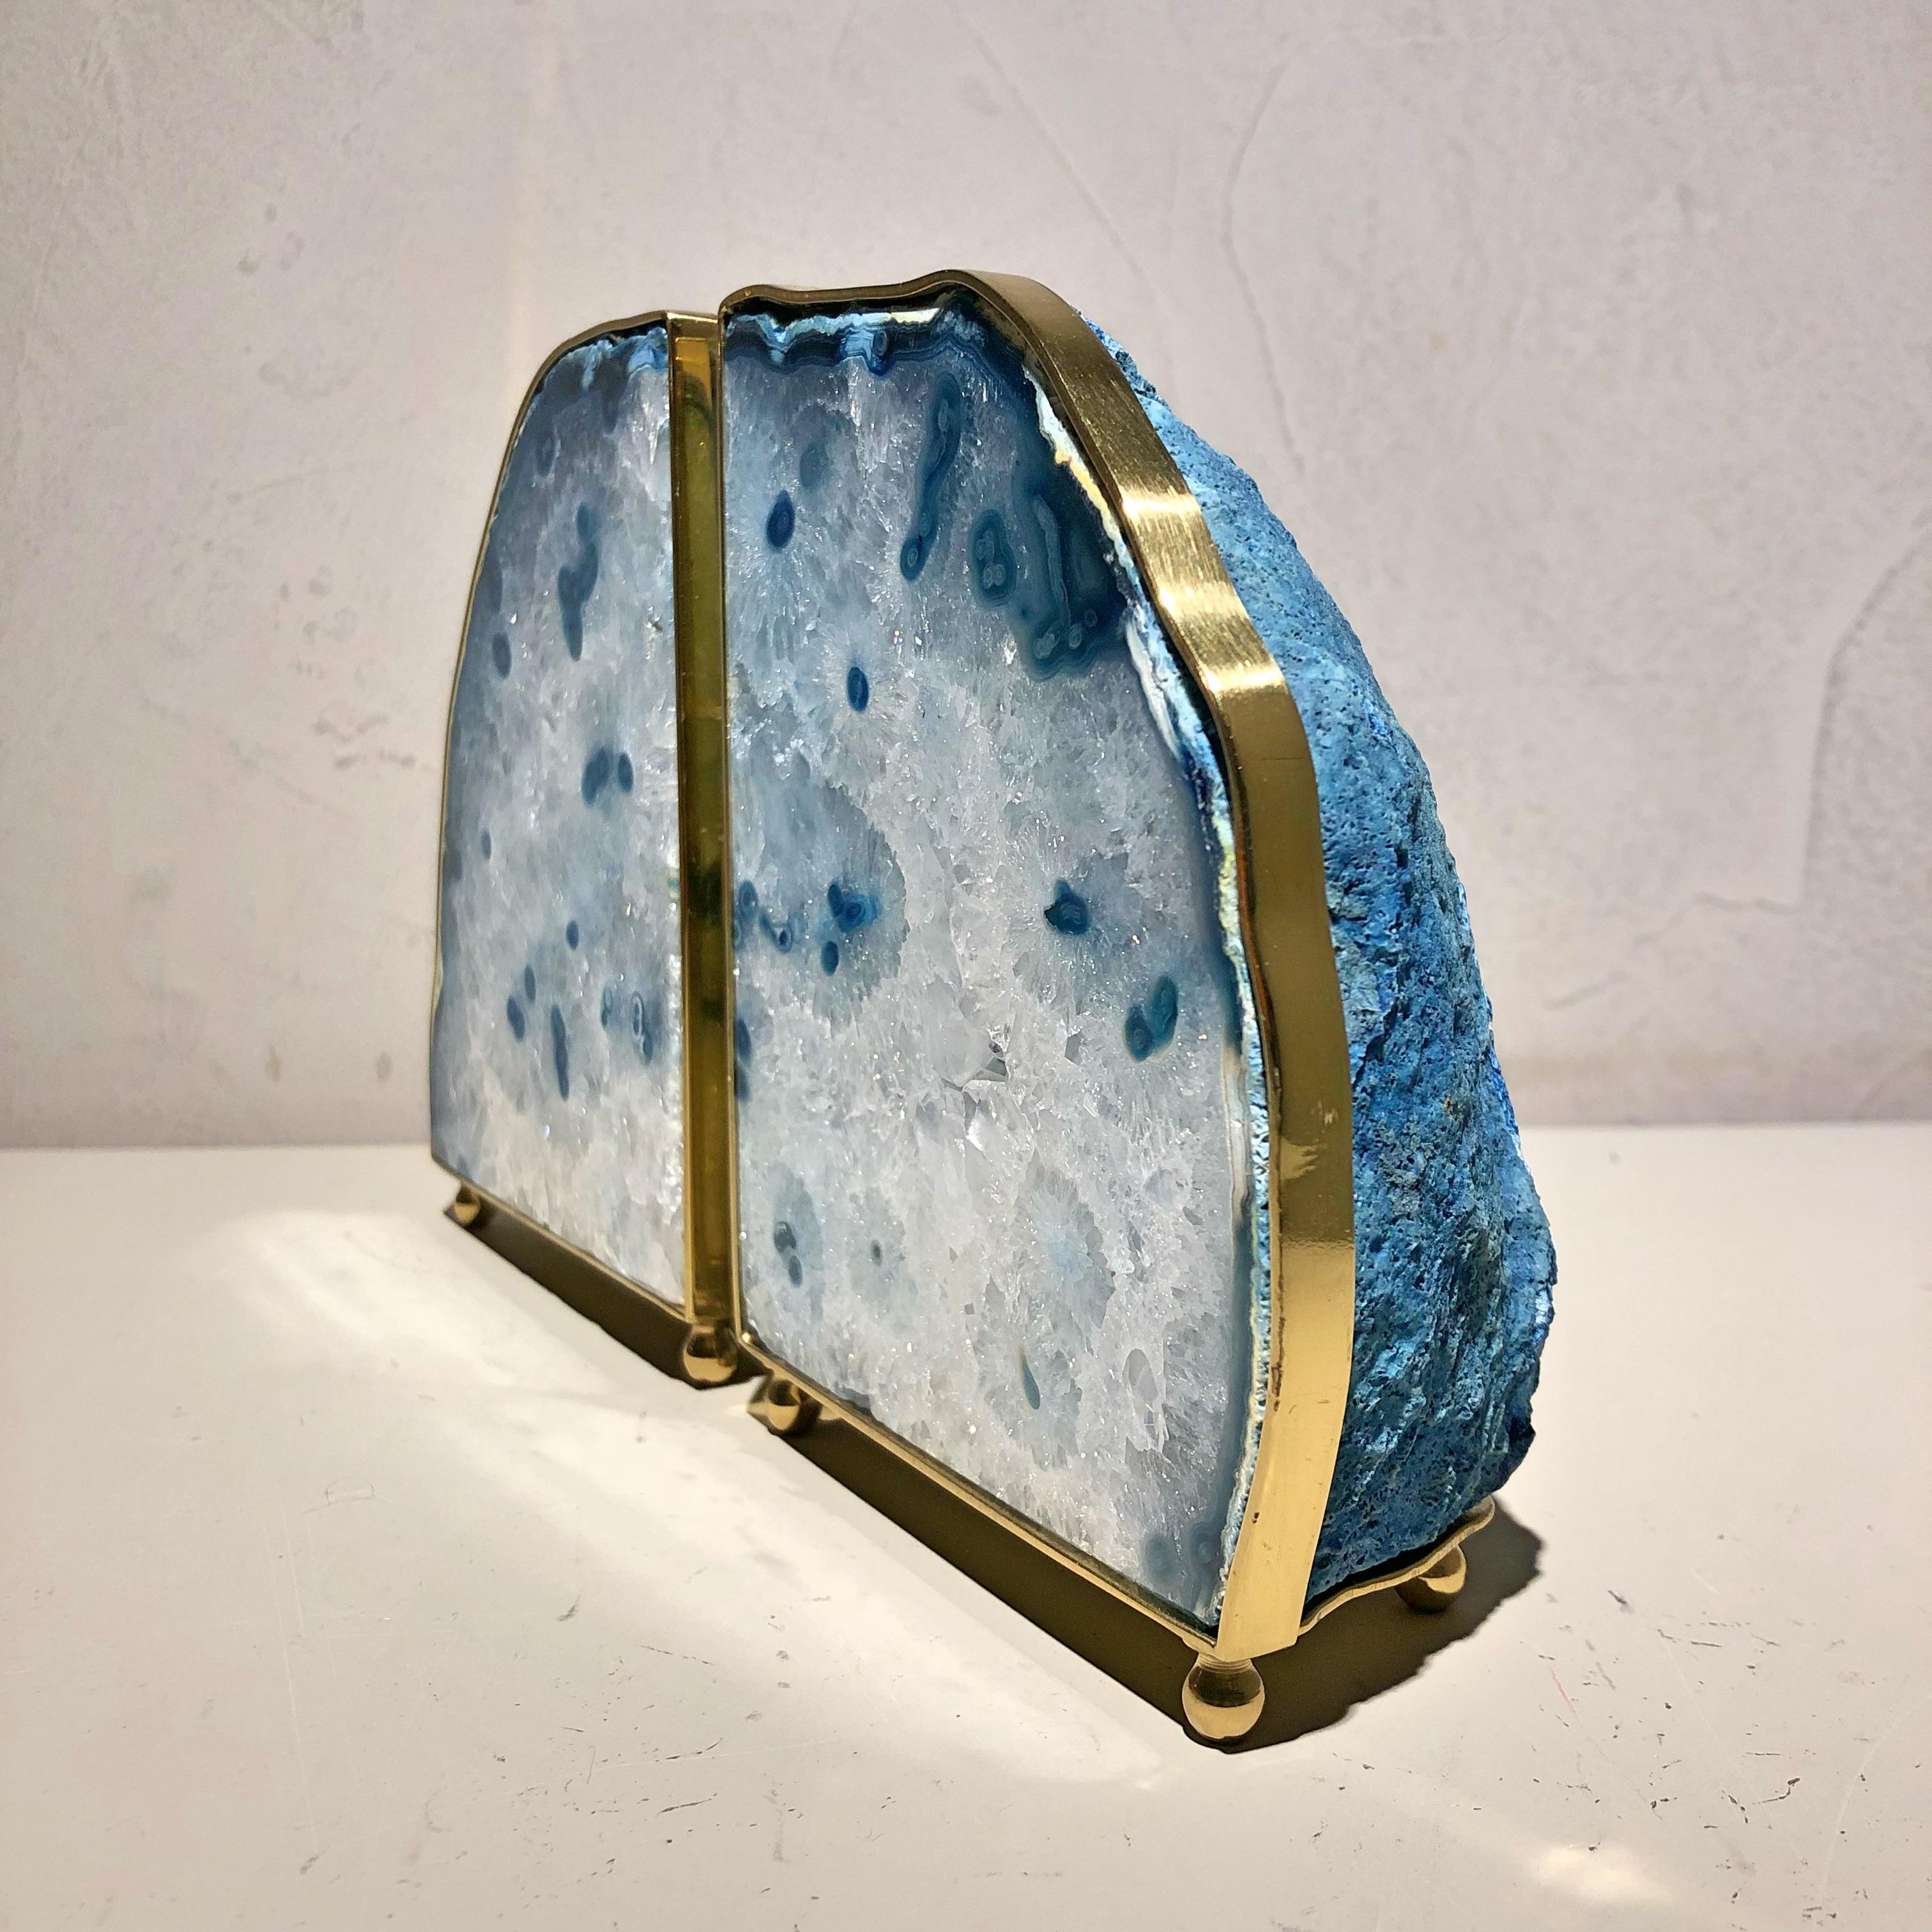 Blue agate and polished and garnished brass pair of bookends.

Natural stone integrates with the different design languages, combining straight and sinuous curves in sophisticated fluidity. The stones range from agate buds, amethyst, citrine to